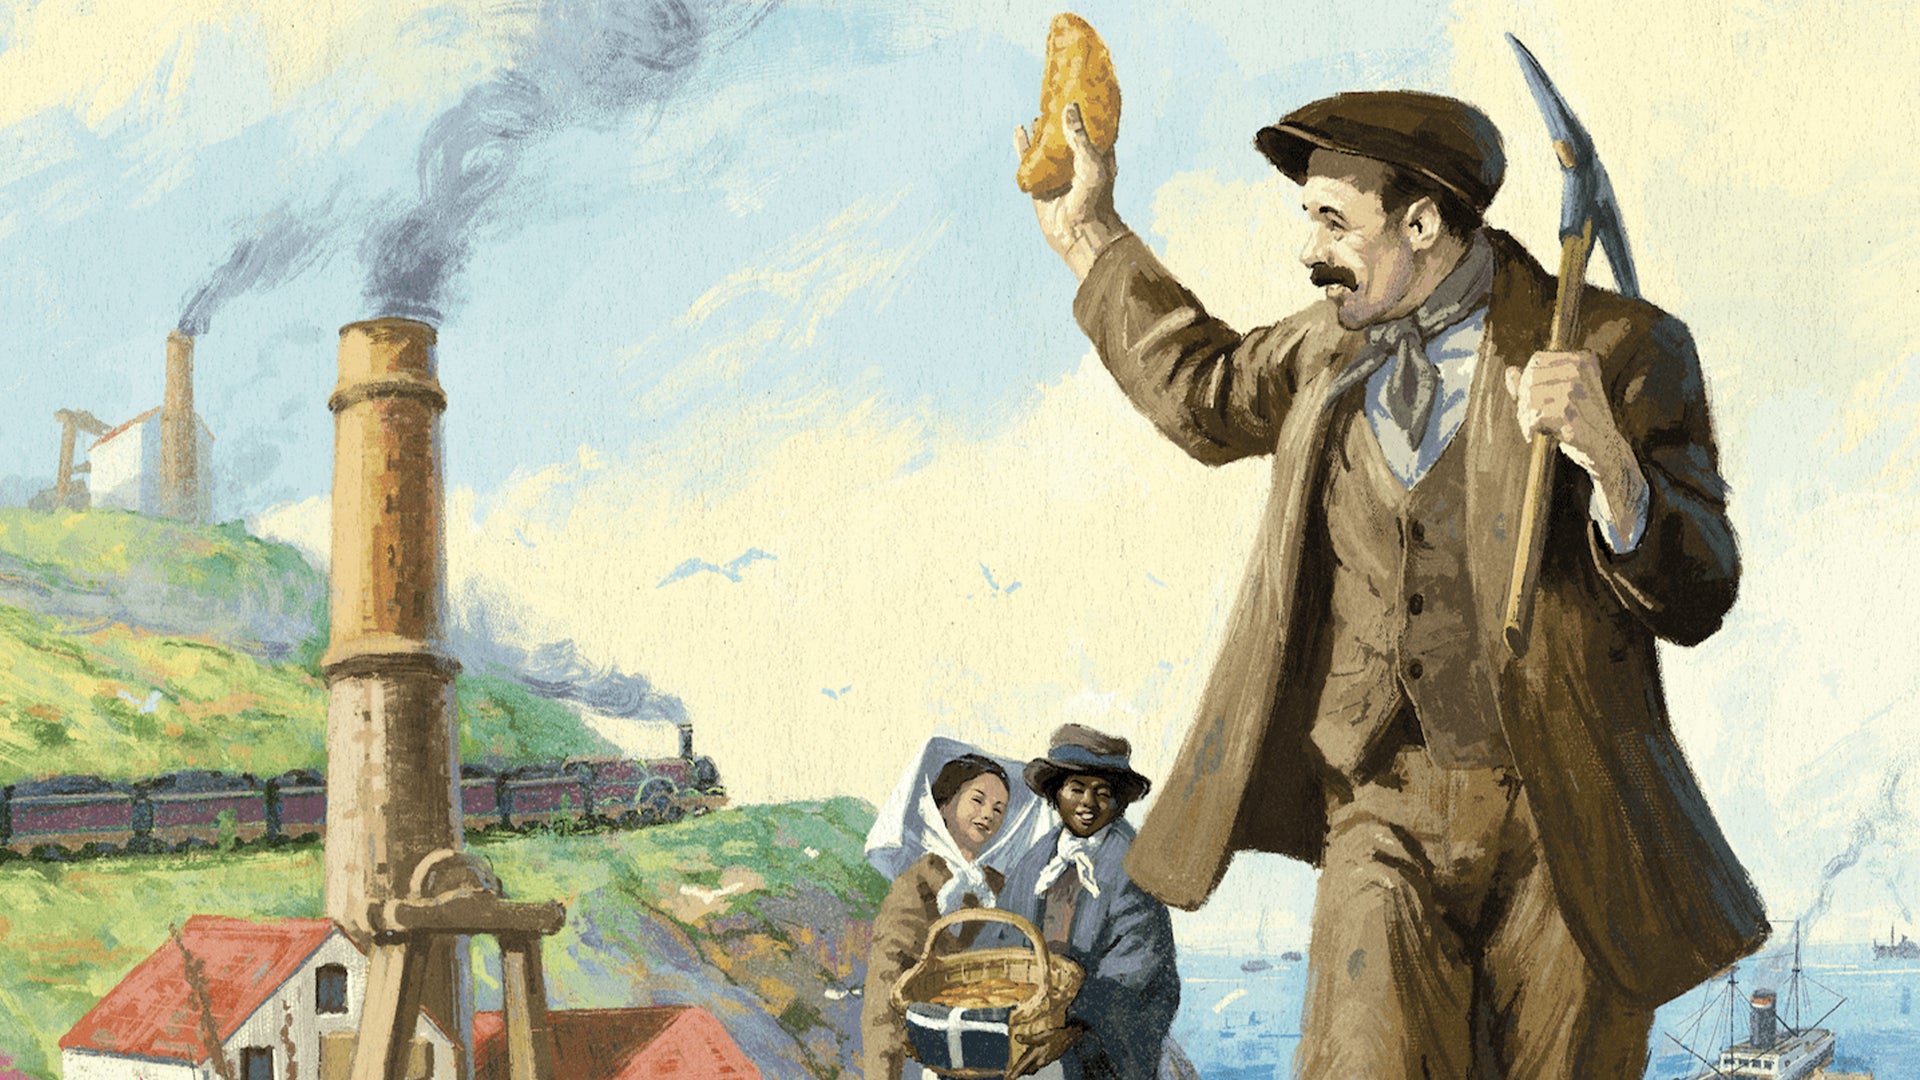 Image for Brass: Birmingham co-creator’s British mining board game Tinners' Trail gets a remake